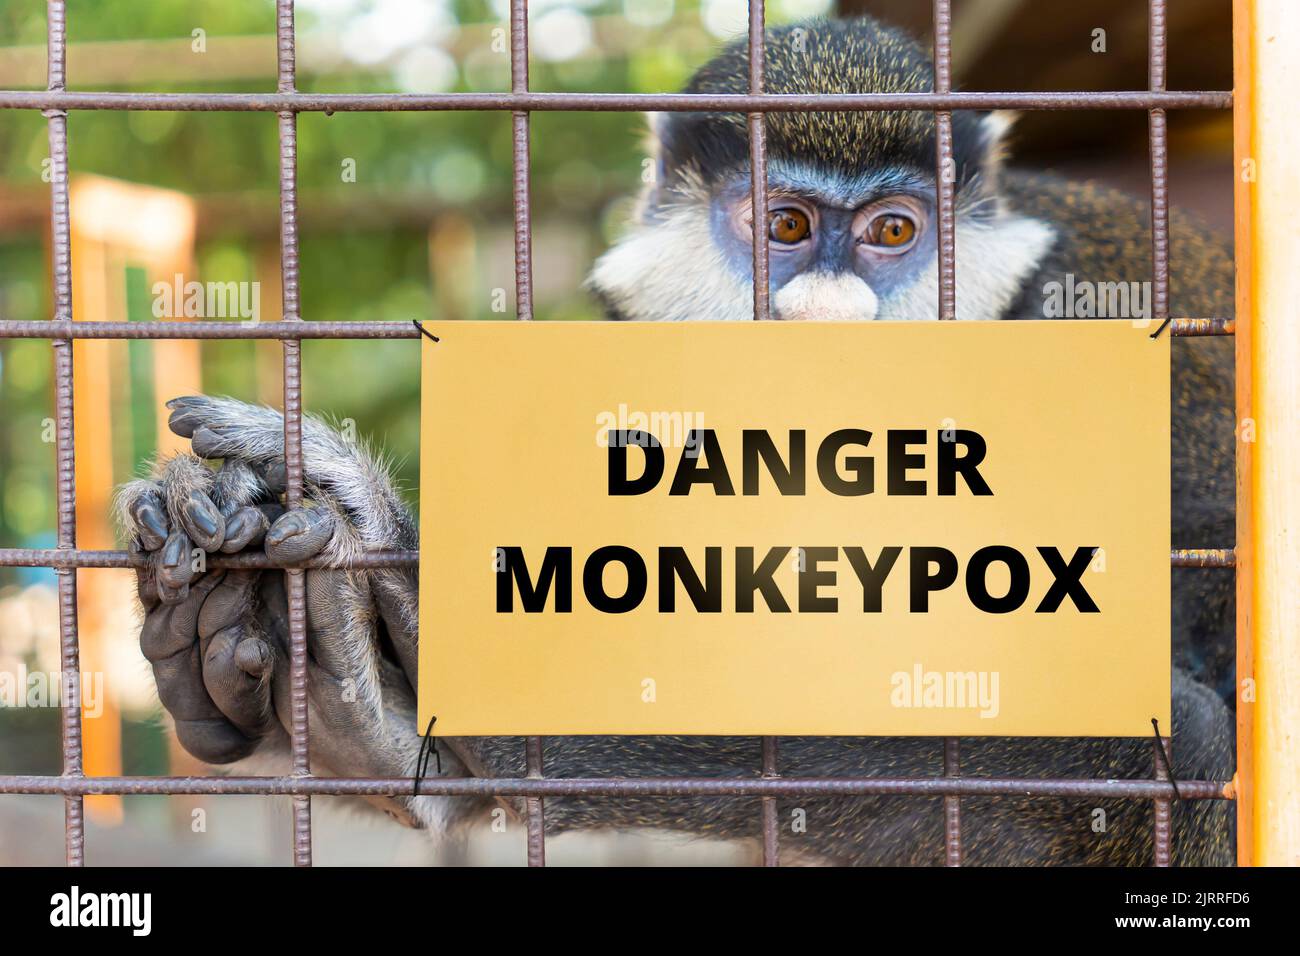 Monkeypox virus, dangerous disease spreads in world. Concept of smallpox, biological weapons, warning and monkeypox. danger of monkeypox inscription o Stock Photo